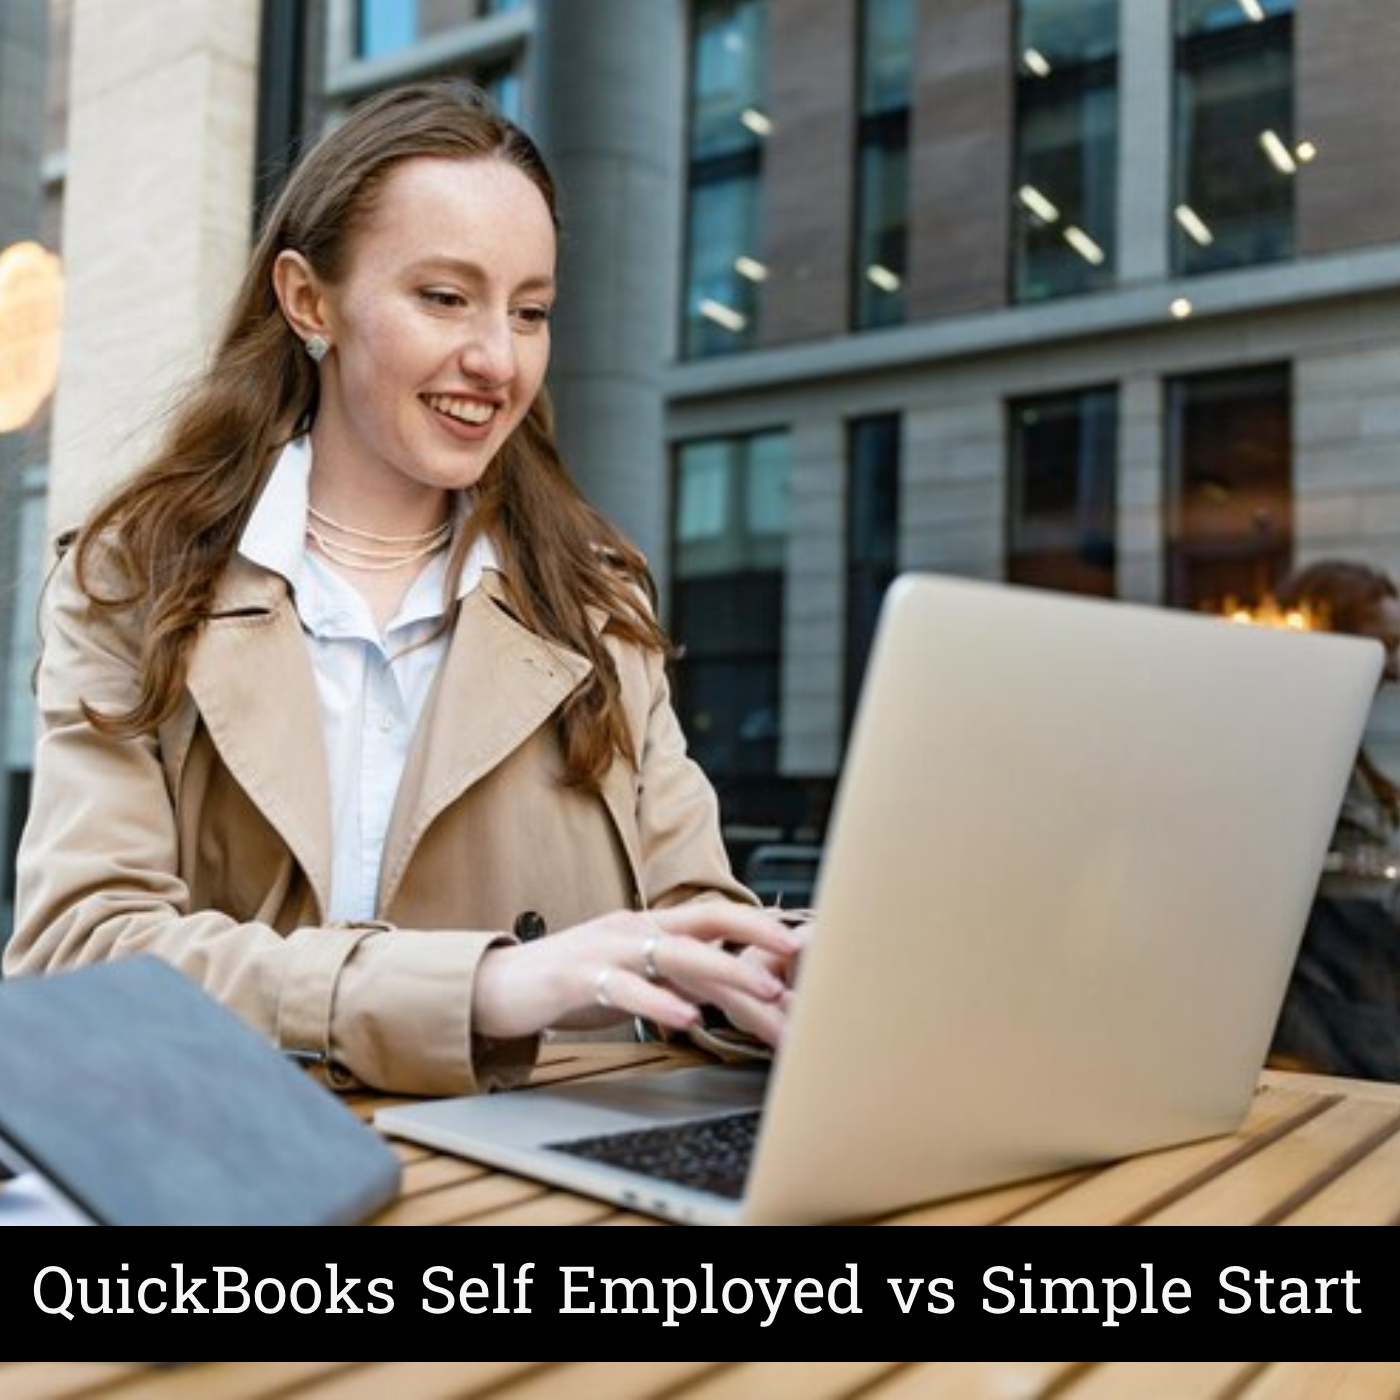 Comparing QuickBooks Self Employed vs Simple Start: Which is Best?